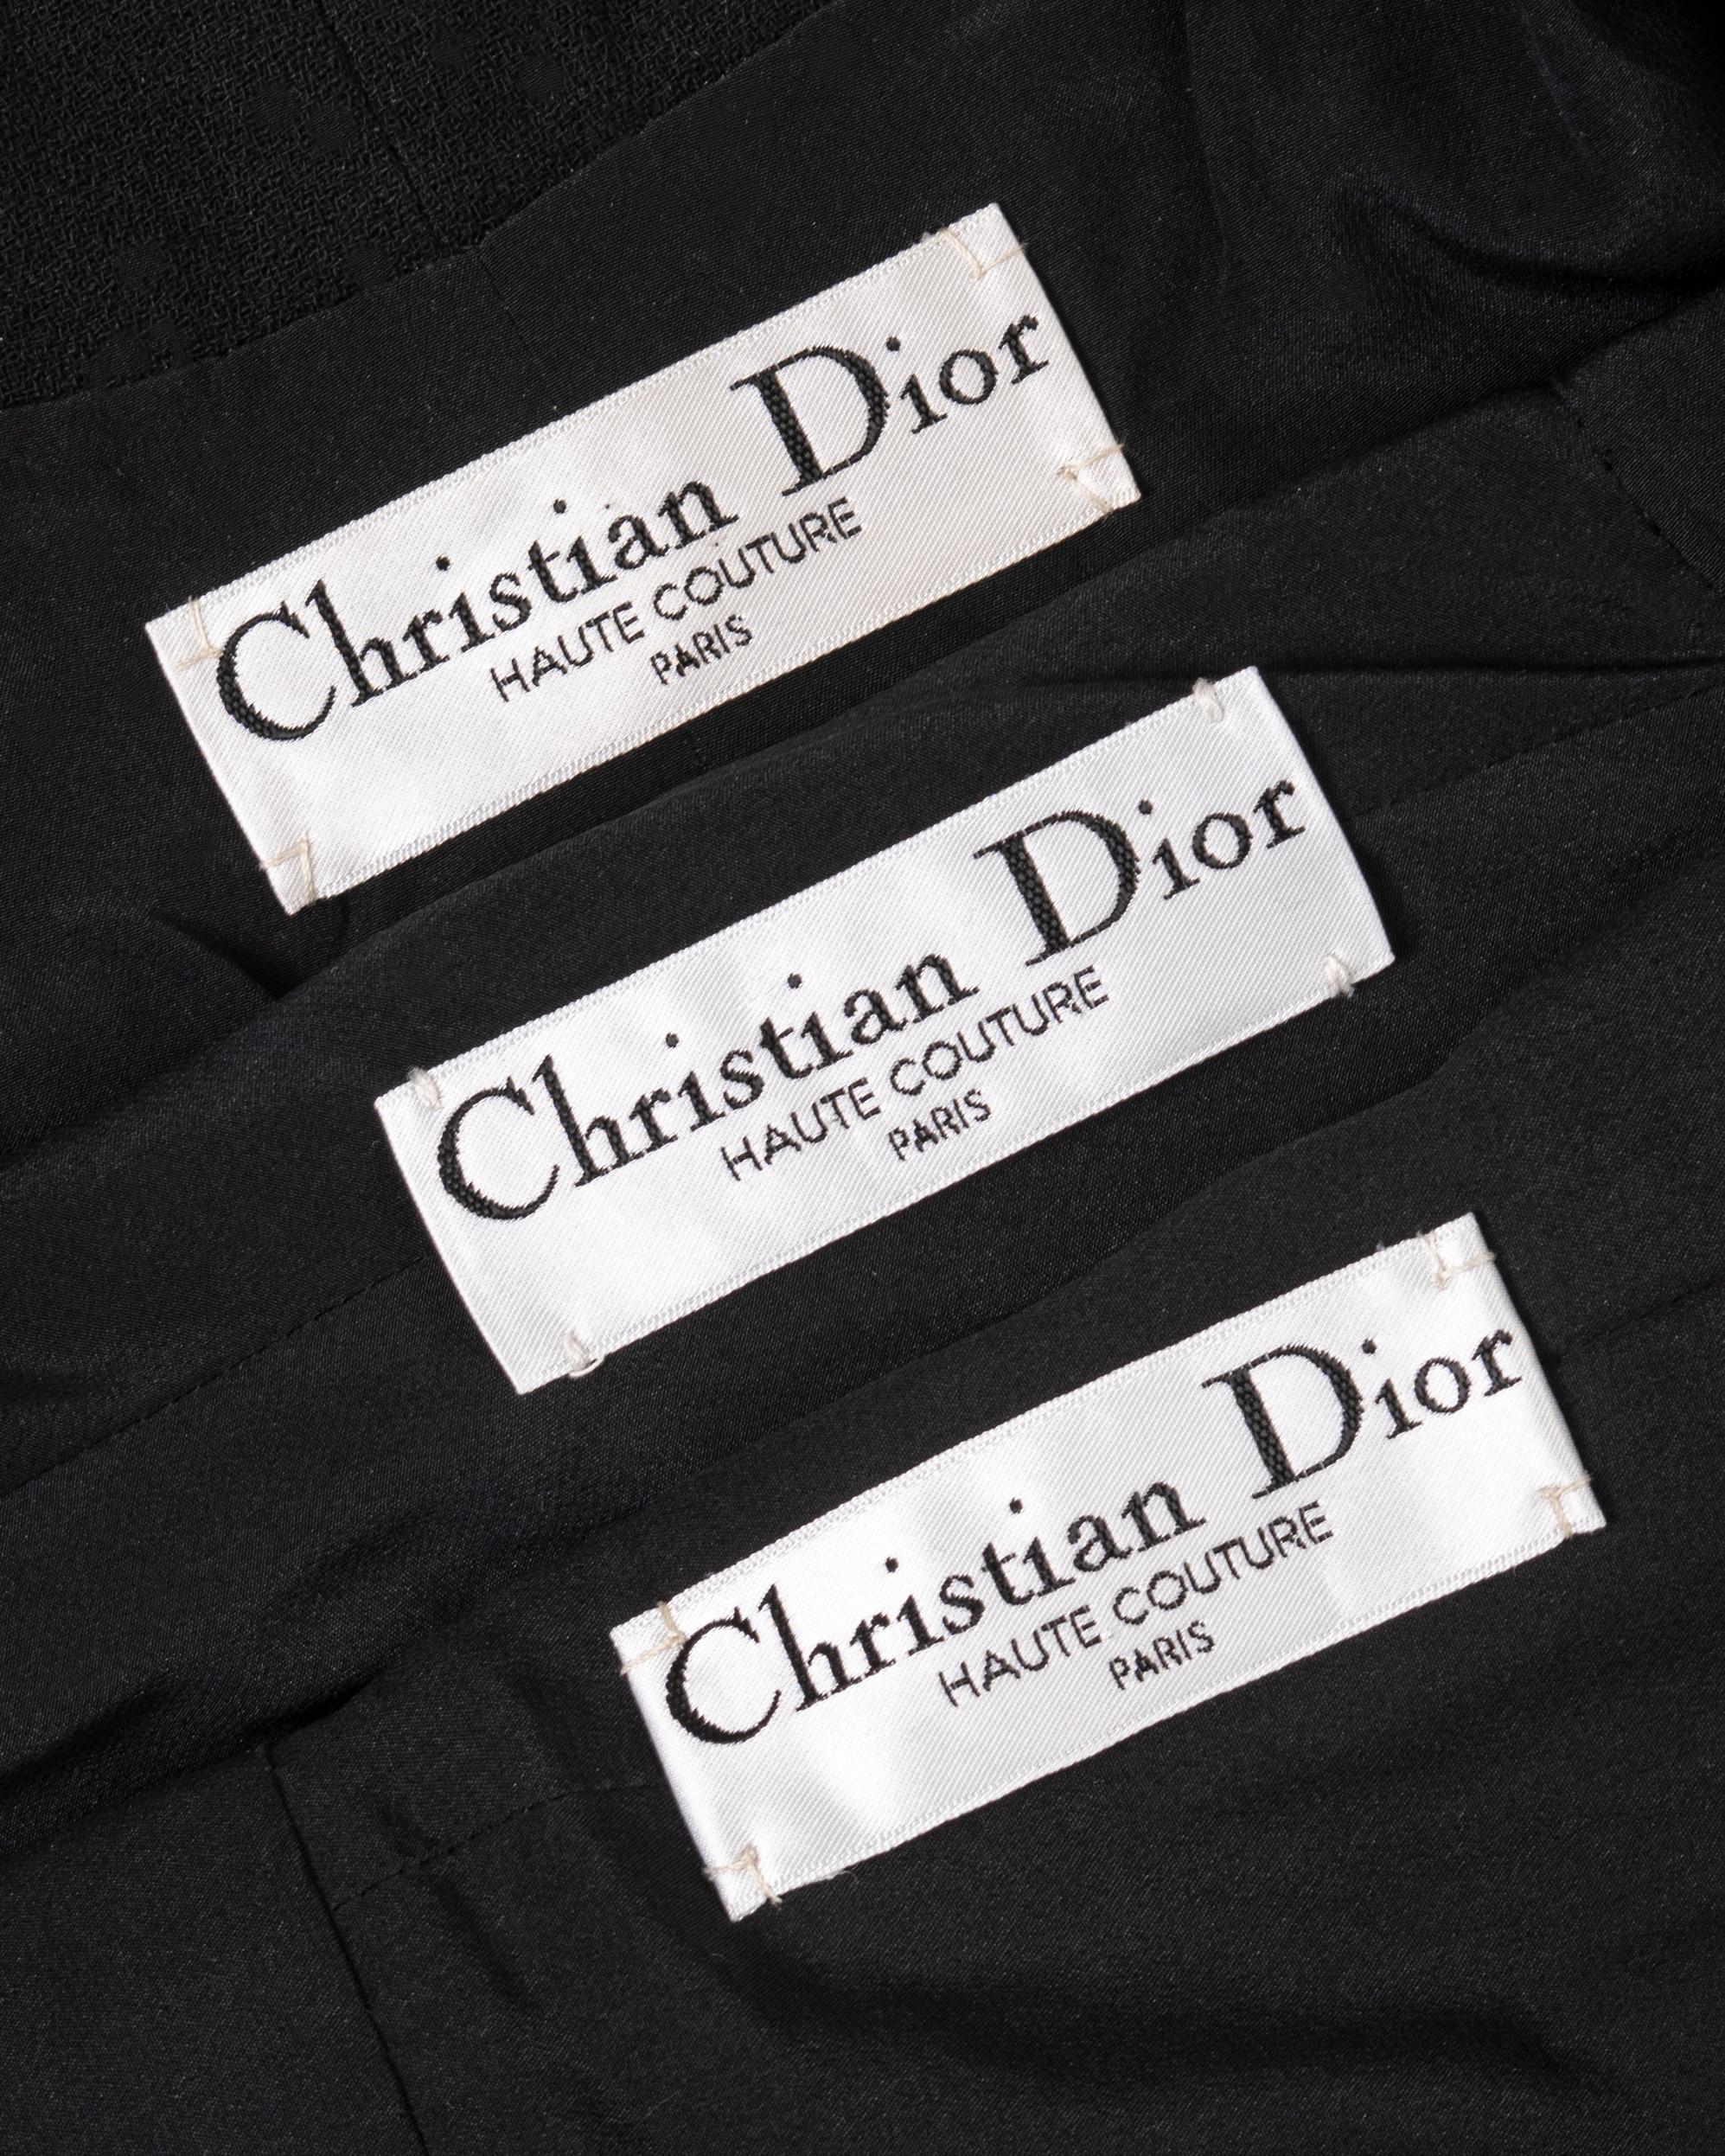 Christian Dior by John Galliano black wool crepe haute-couture bar suit, fw 1998 For Sale 8